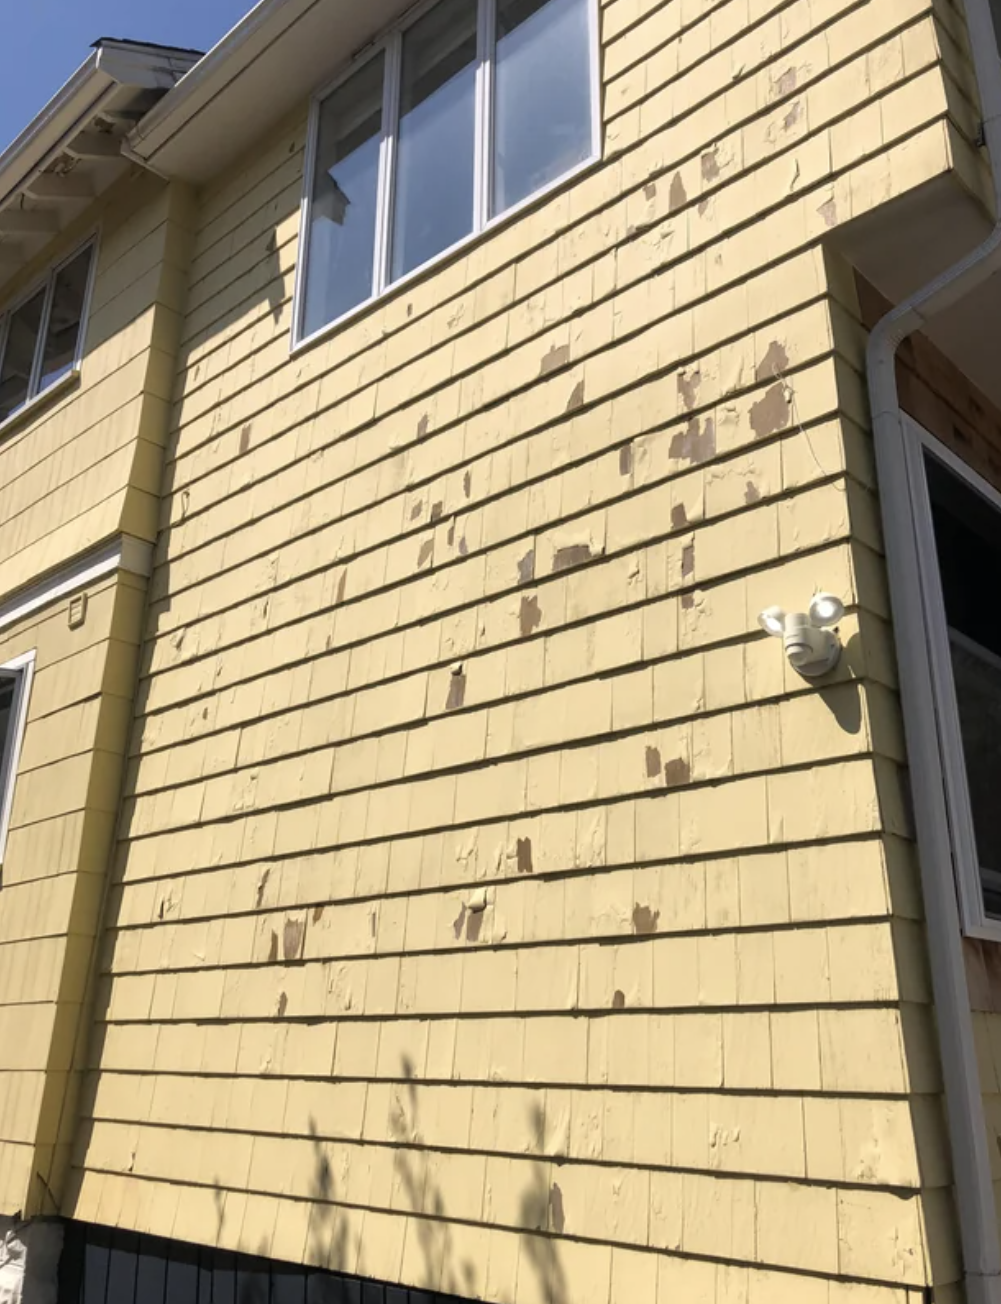 The exterior paint of a house is peeling